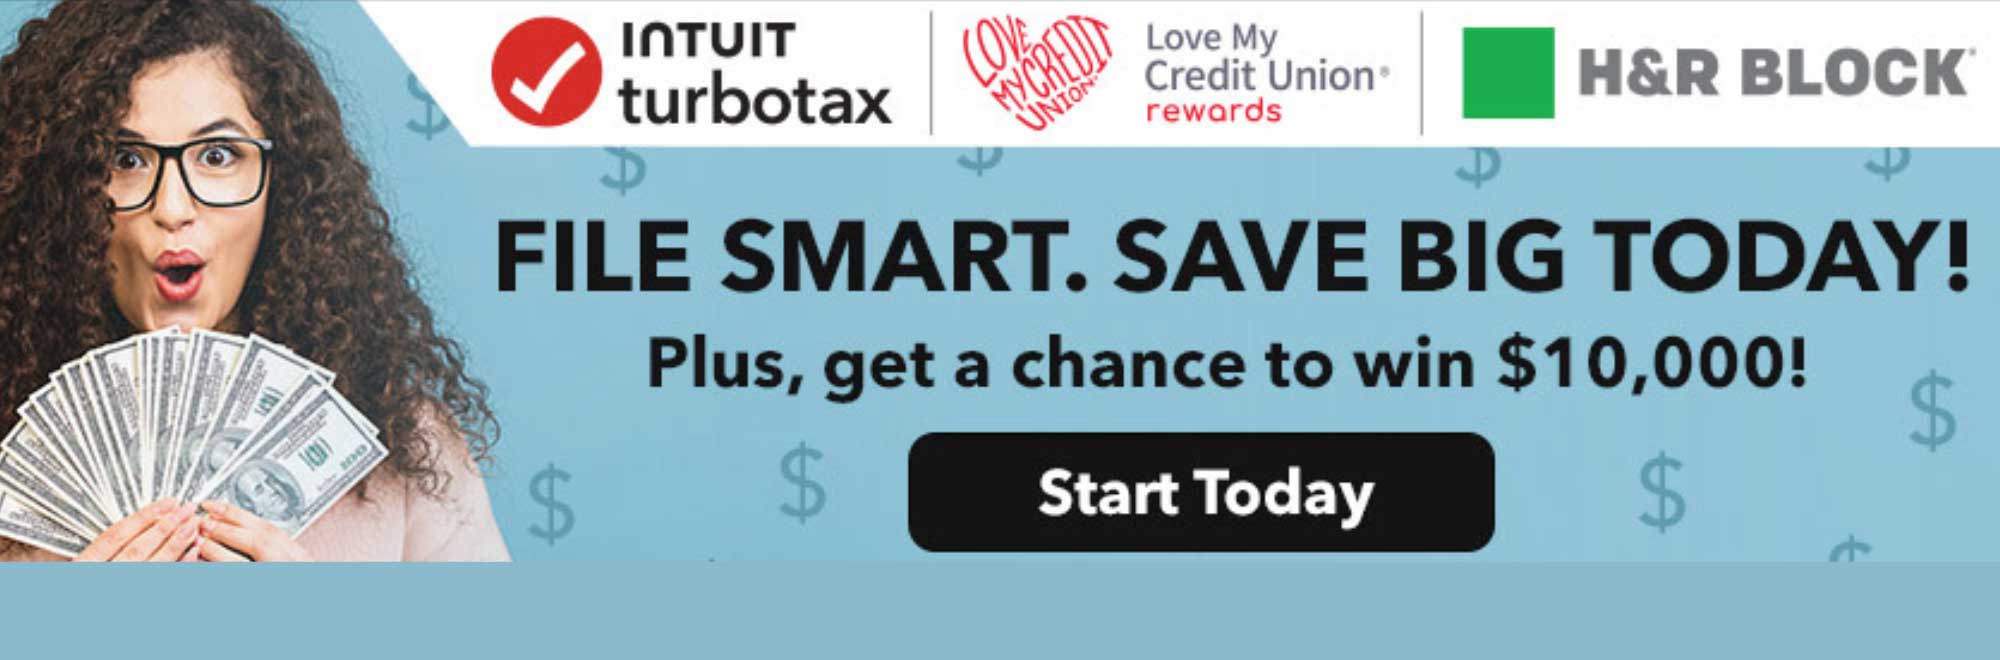 Save on TurboTax and H&R Block through Love My Credit Union Rewards, and get a chance to win $10000.